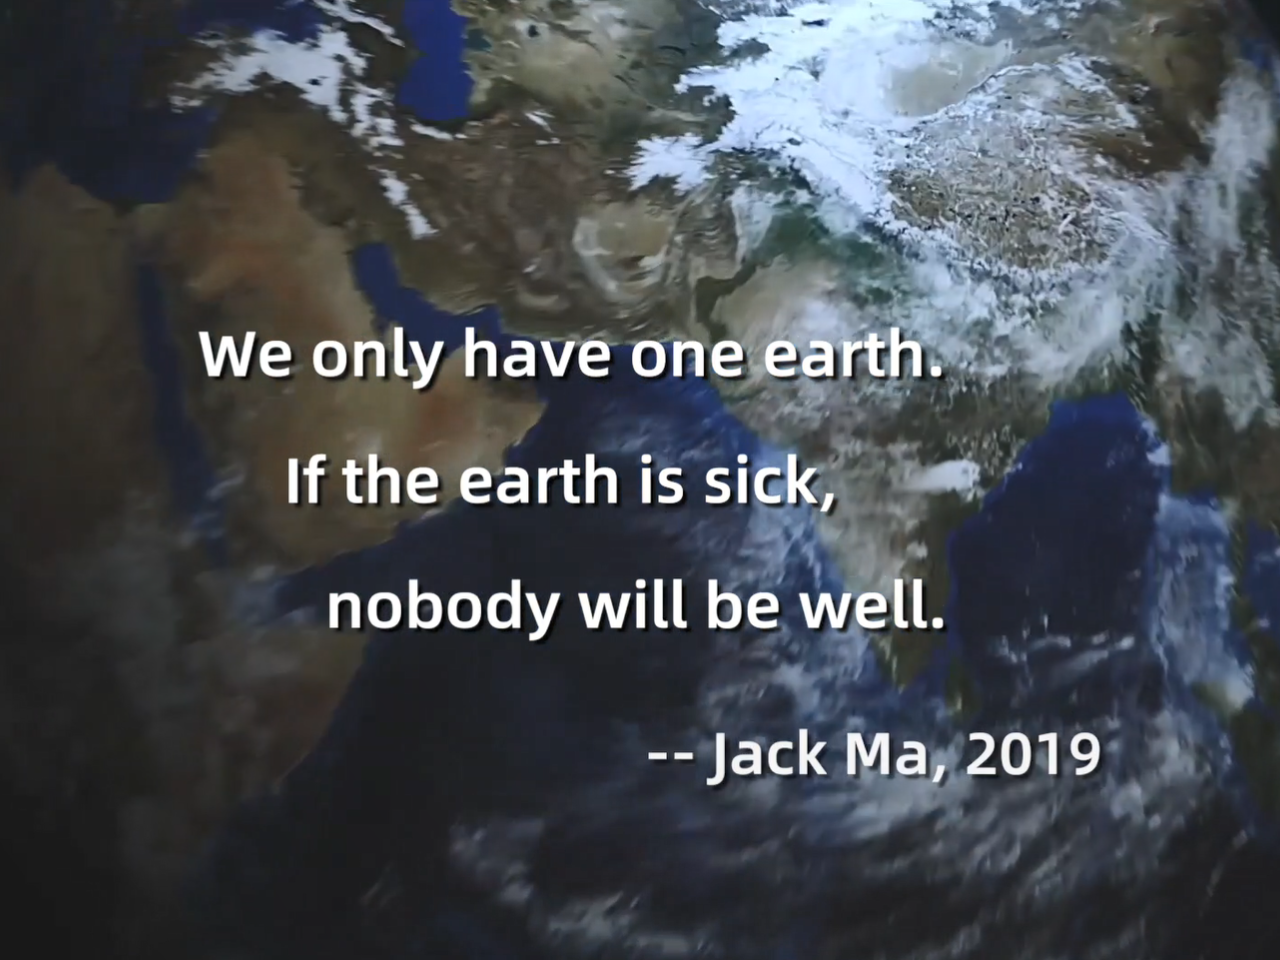 "We only have on Earth. If the Earth is sick, nobody will be well"